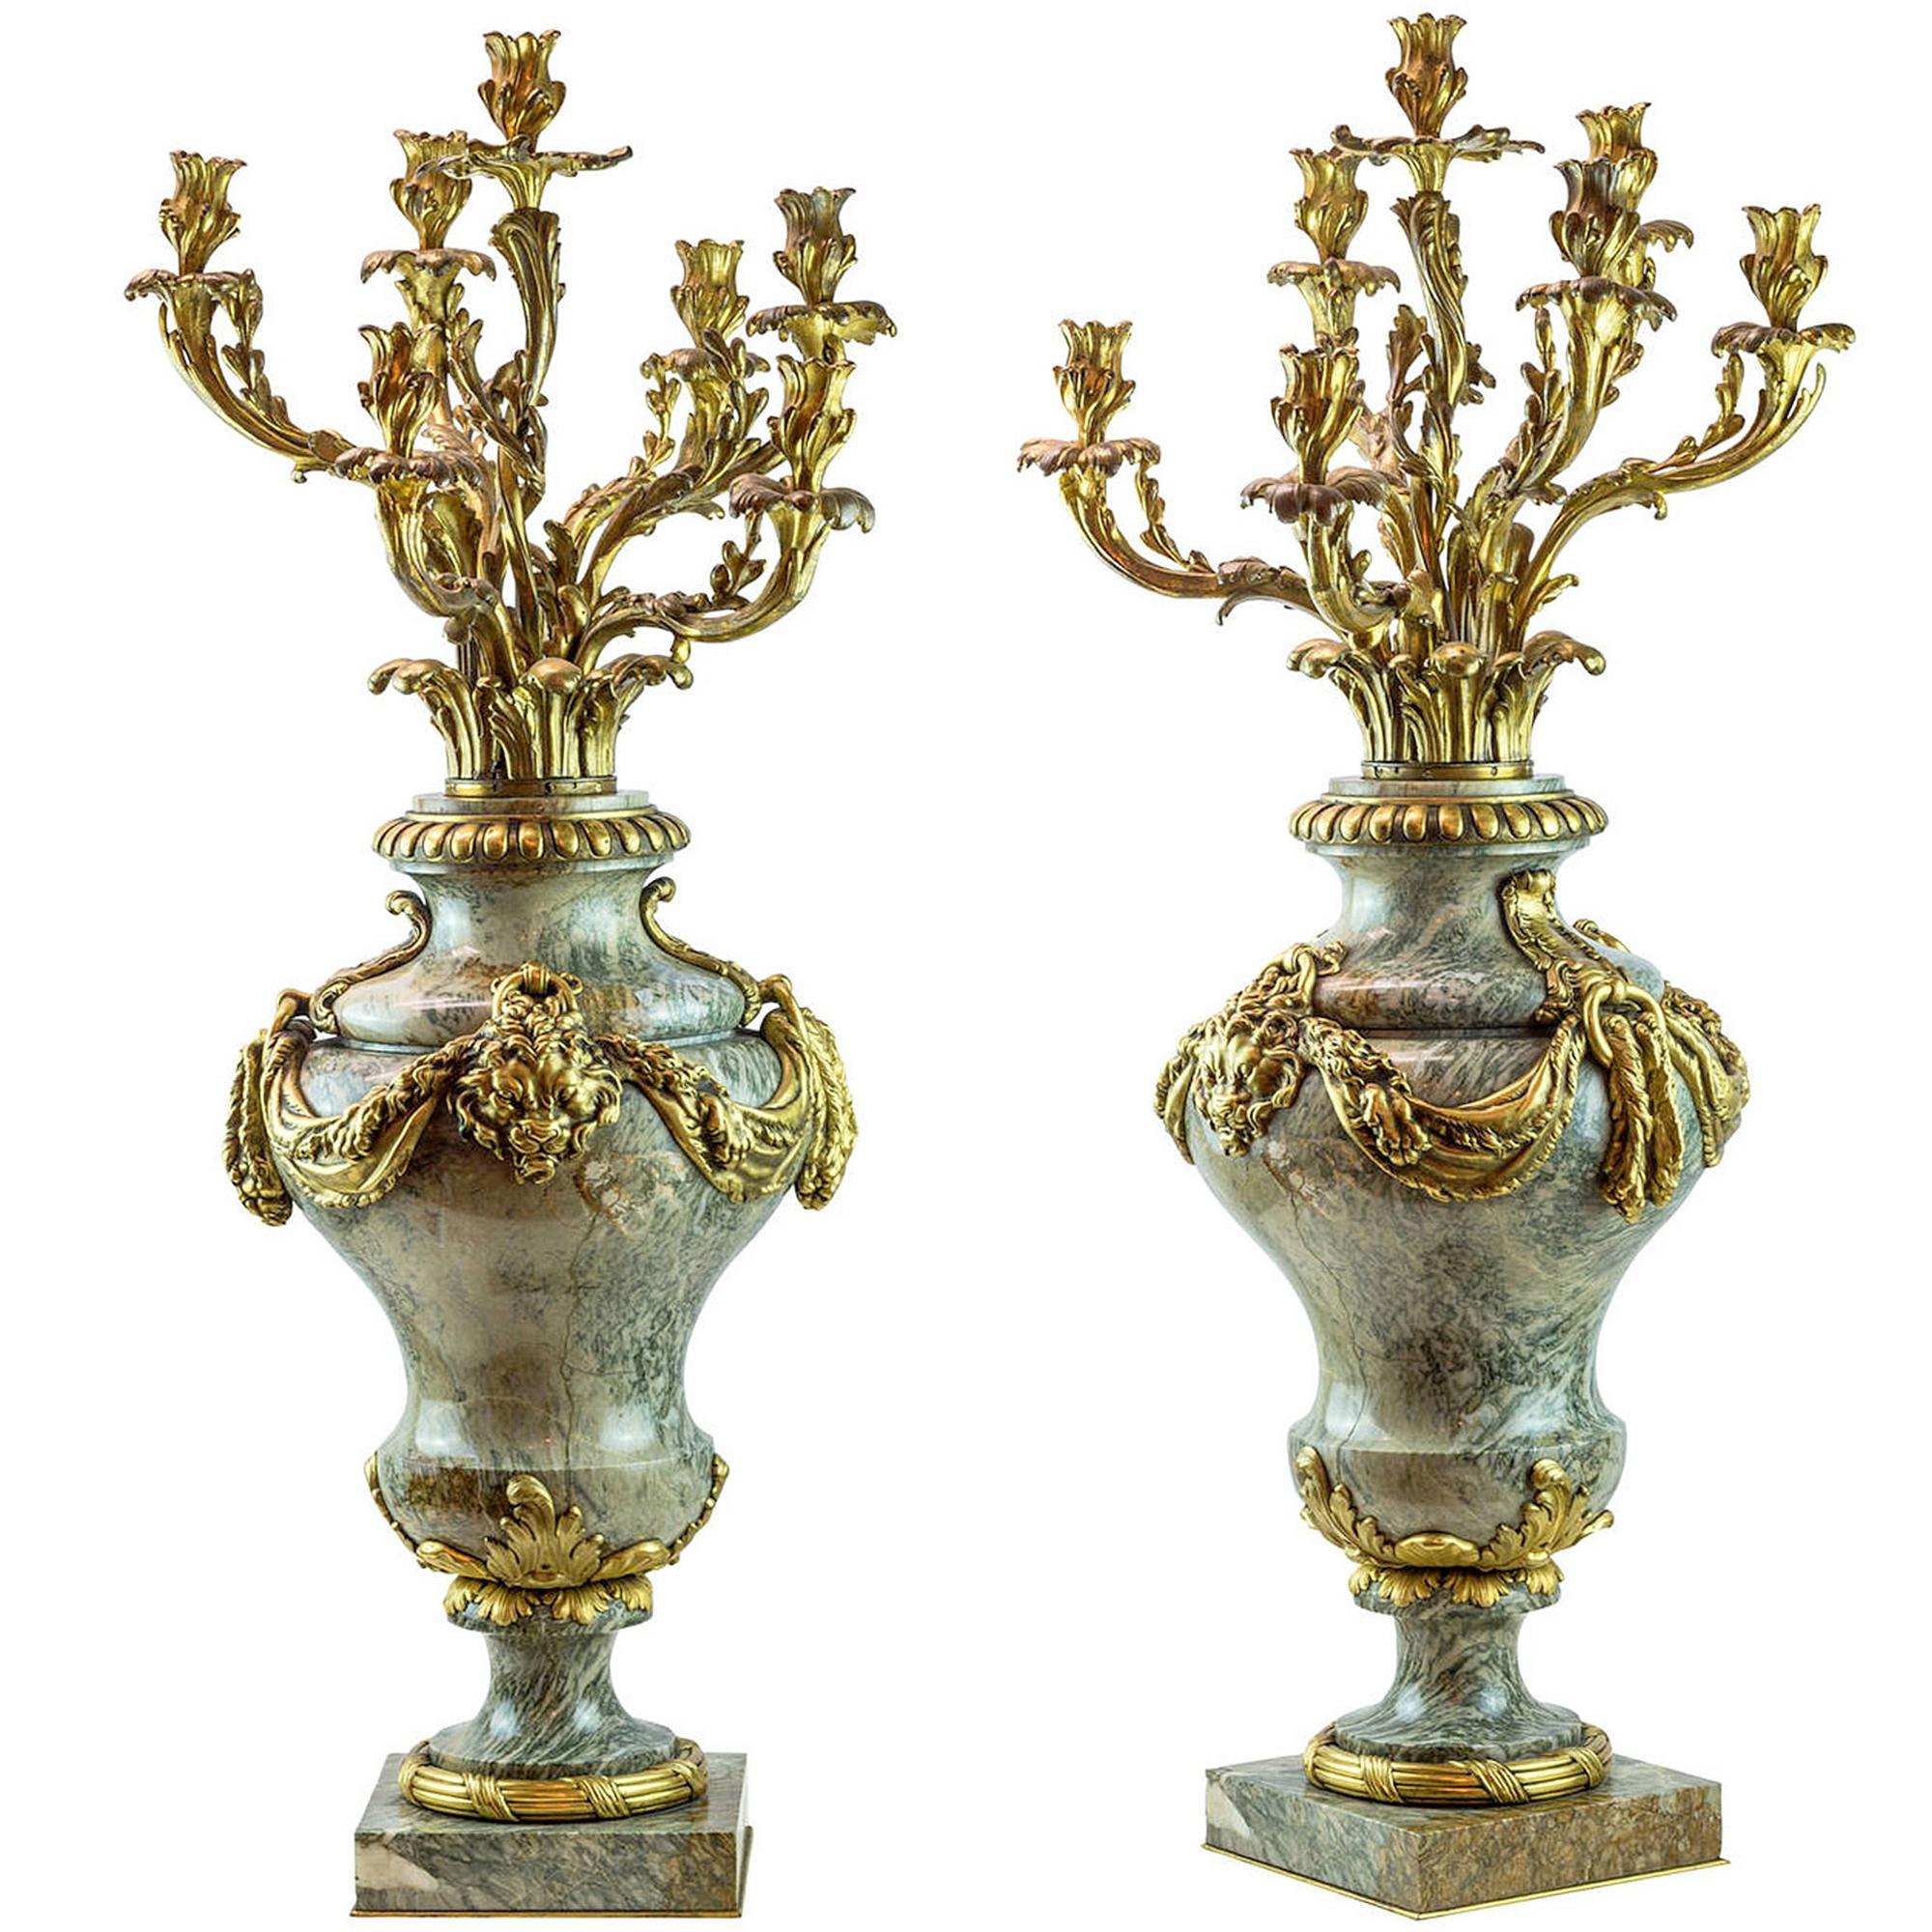 Pair of Ormolu and Marble Seven-Light Candelabras Attributed to Eugène Cornu